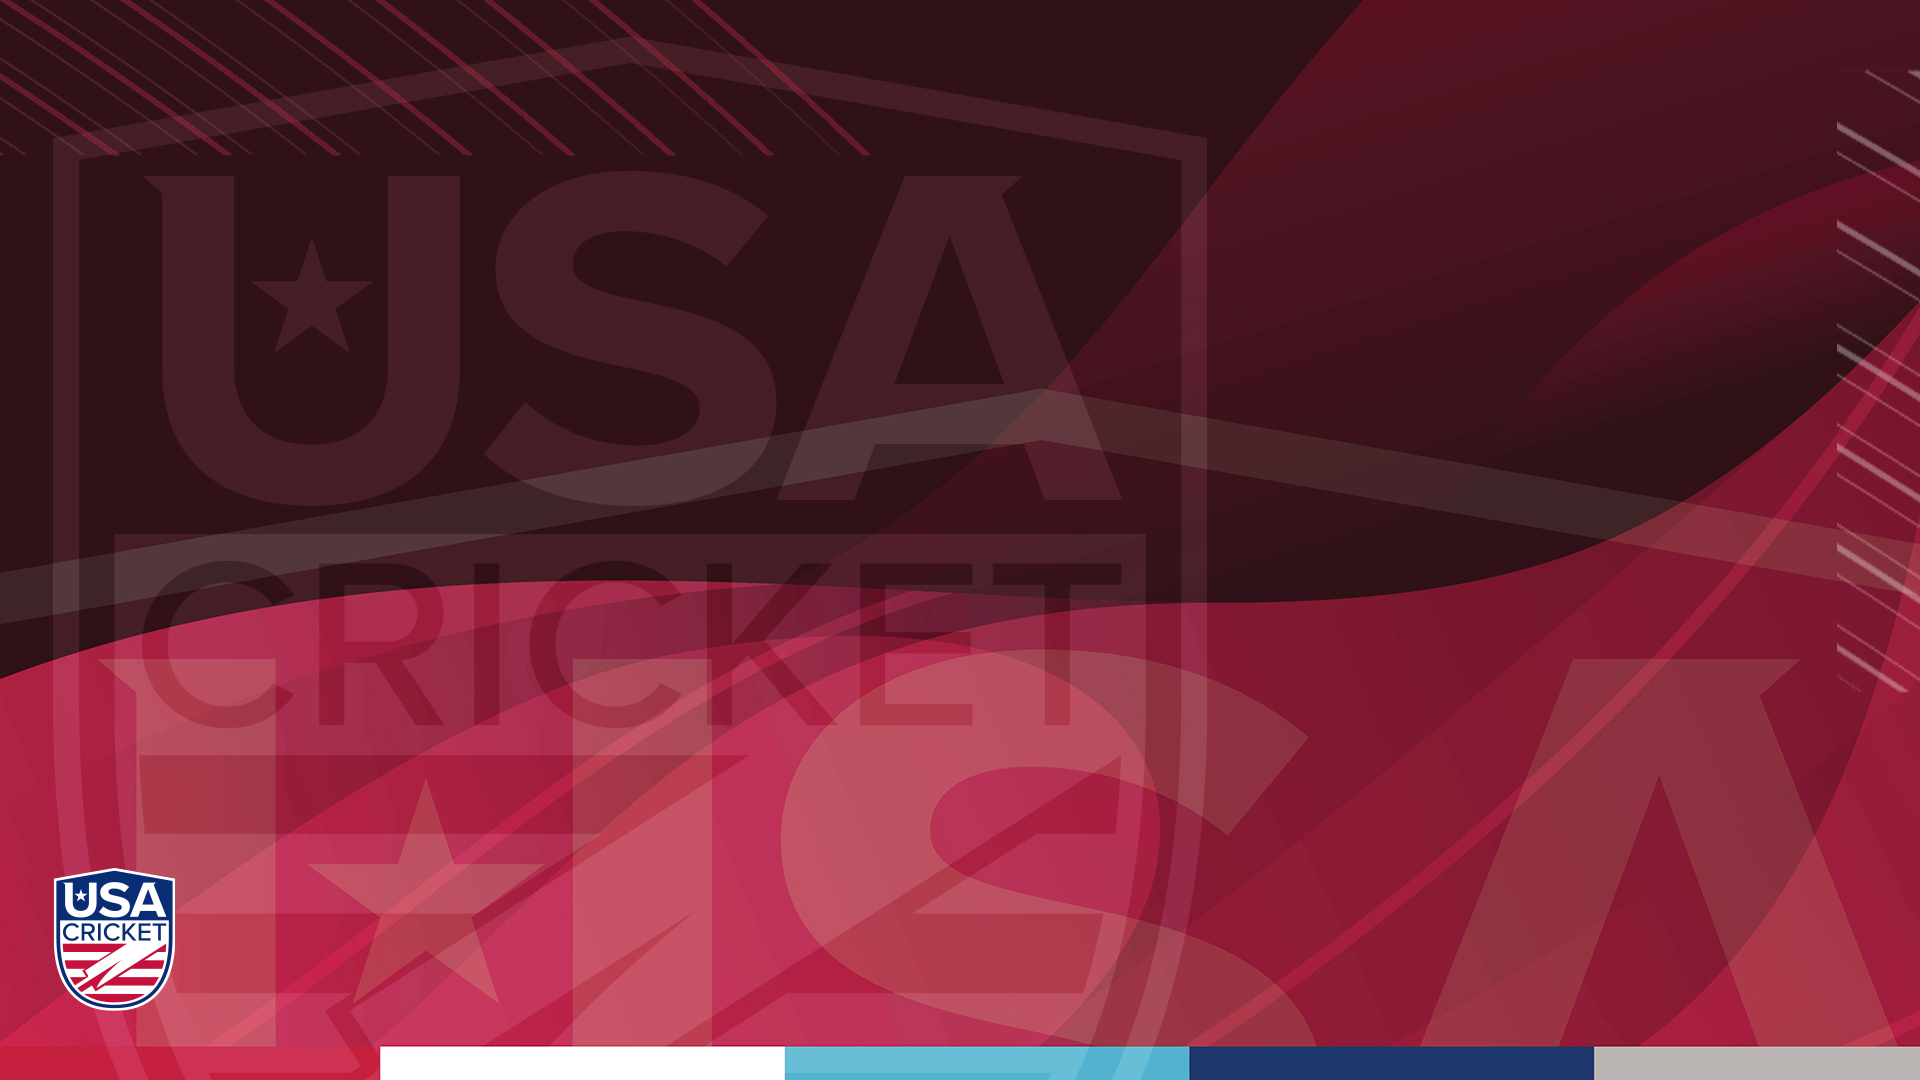 USA CRICKET DELAYED 2021 ELECTION RESULTS ANNOUNCEMENT